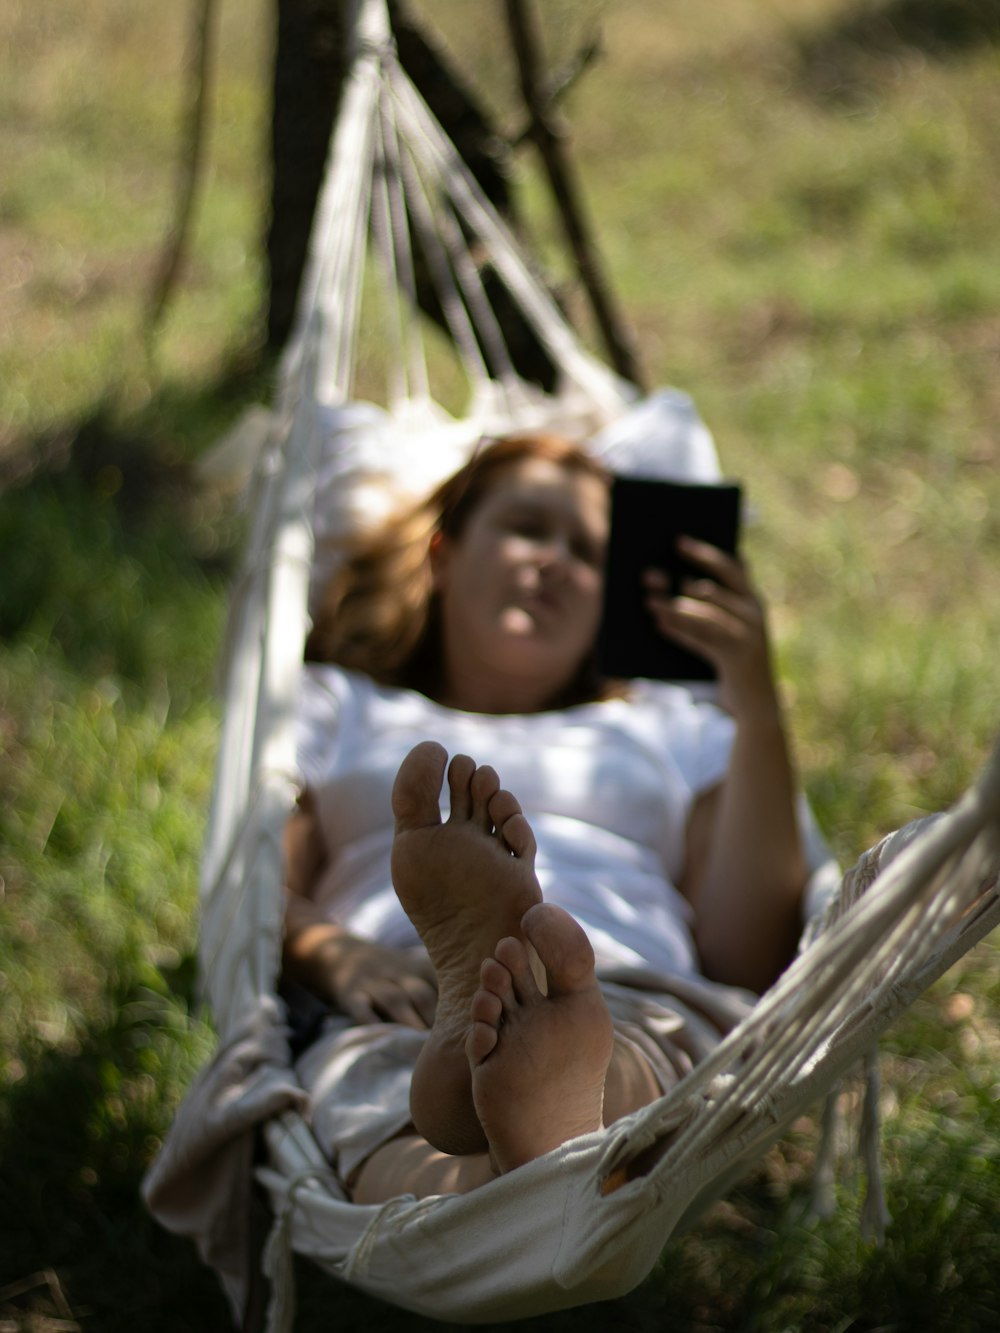 a woman laying in a hammock reading a book